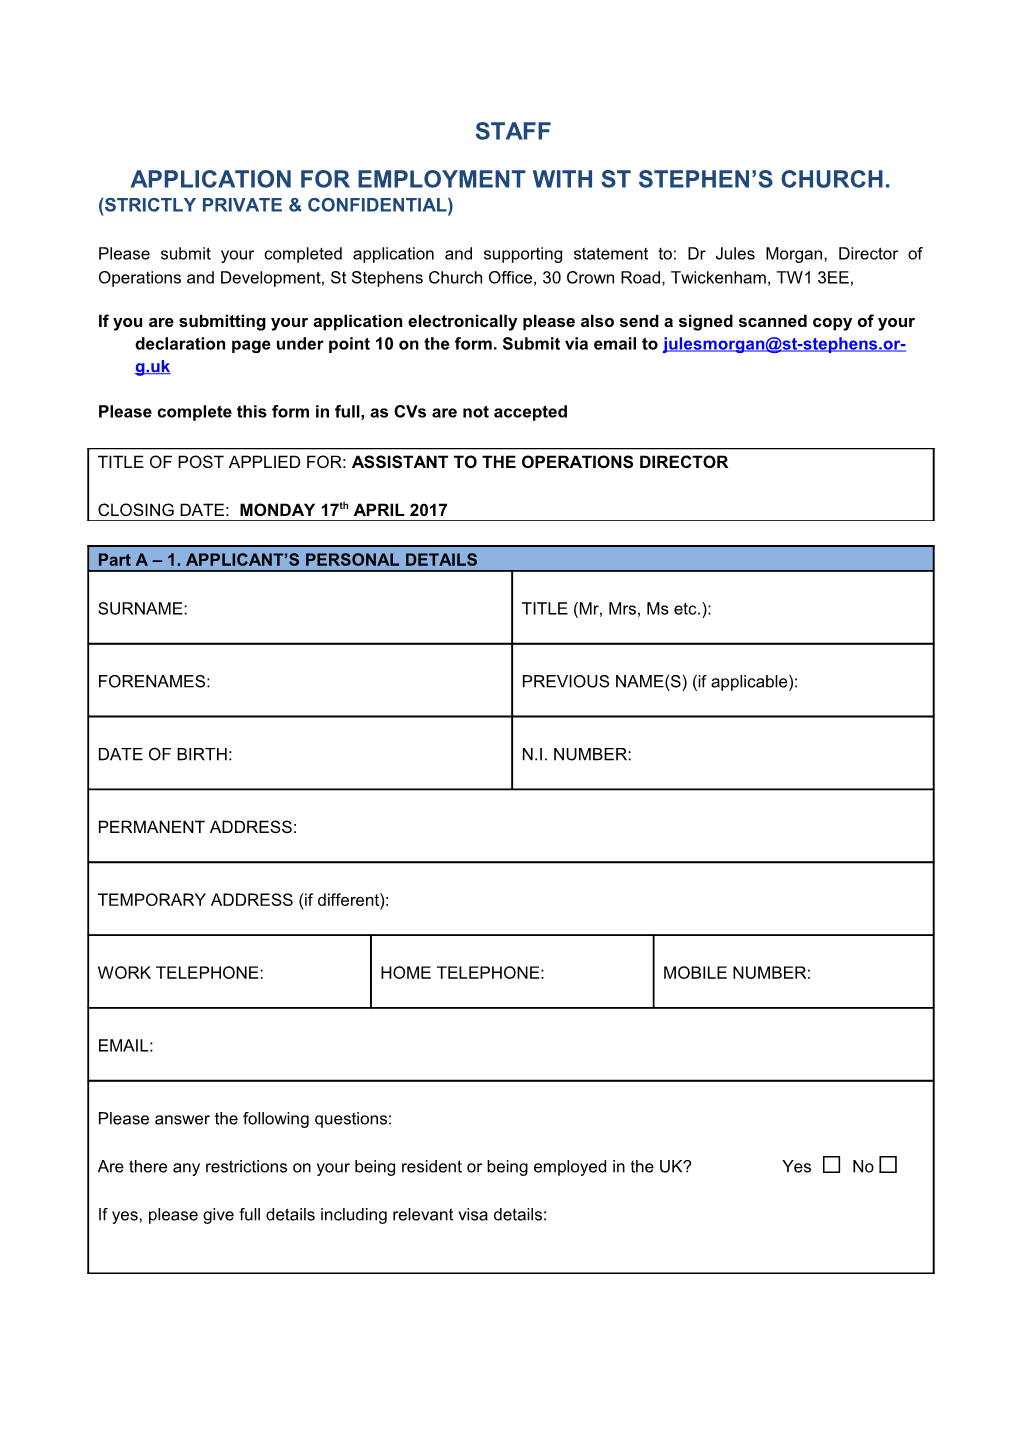 APPLICATION for EMPLOYMENT with St Stephen S Church